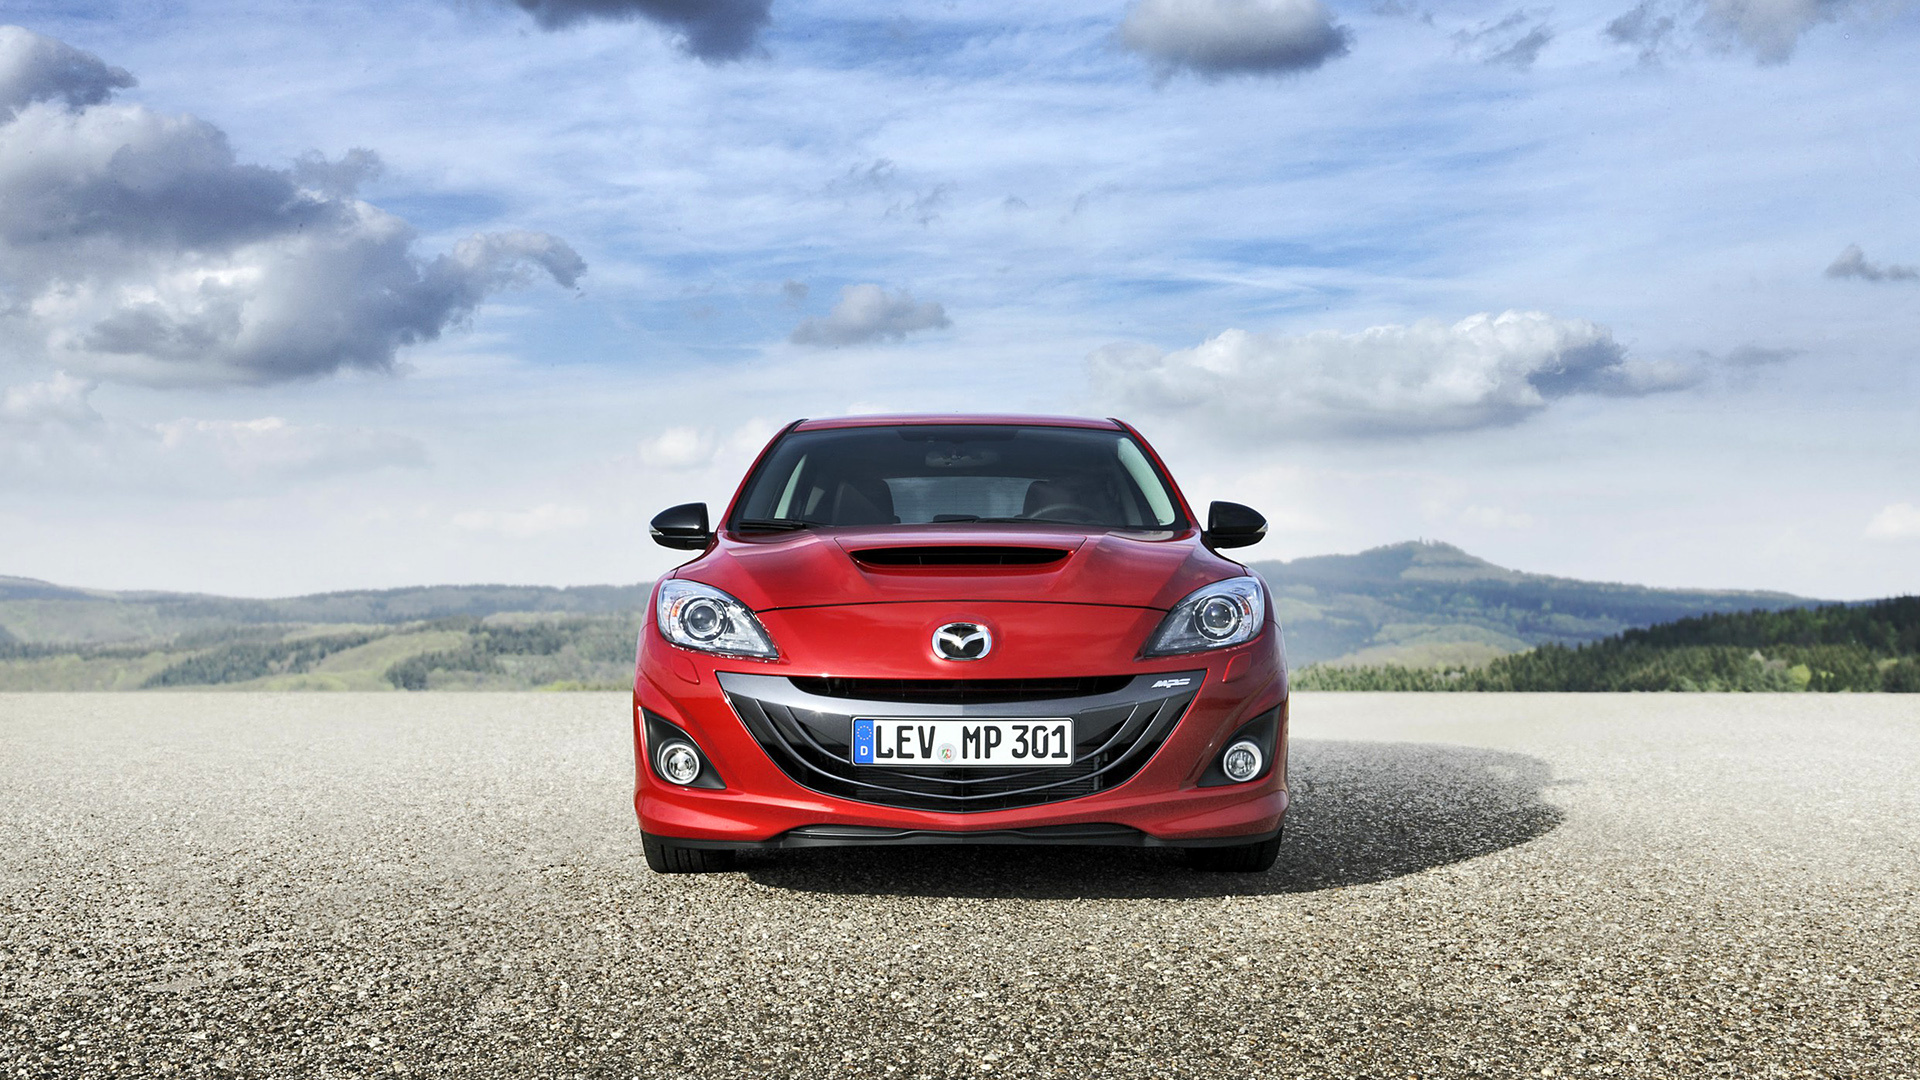 Mazda 3, MPS model, Attention to detail, Stunning front view, 1920x1080 Full HD Desktop